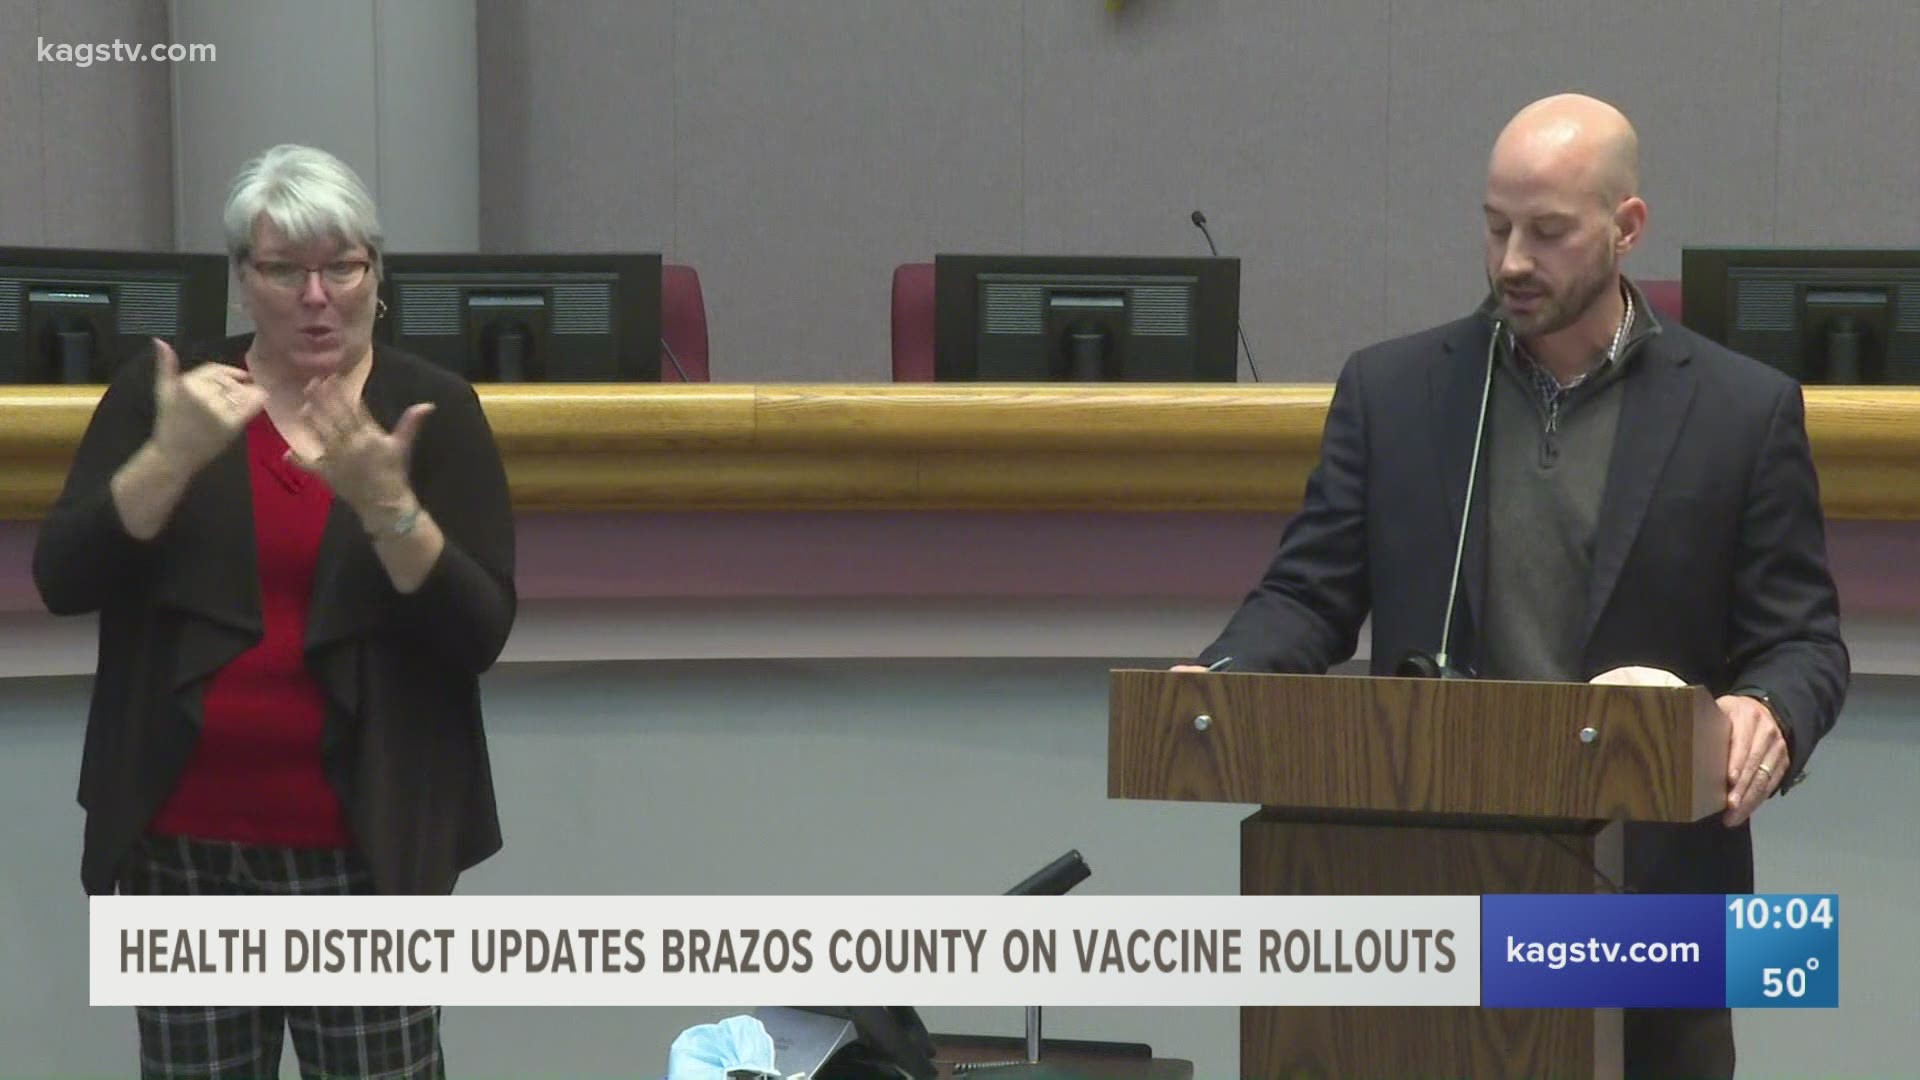 Local leaders and health officials discussed the latest on vaccine rollouts in Brazos County, including a vaccination site at the Brazos Center.